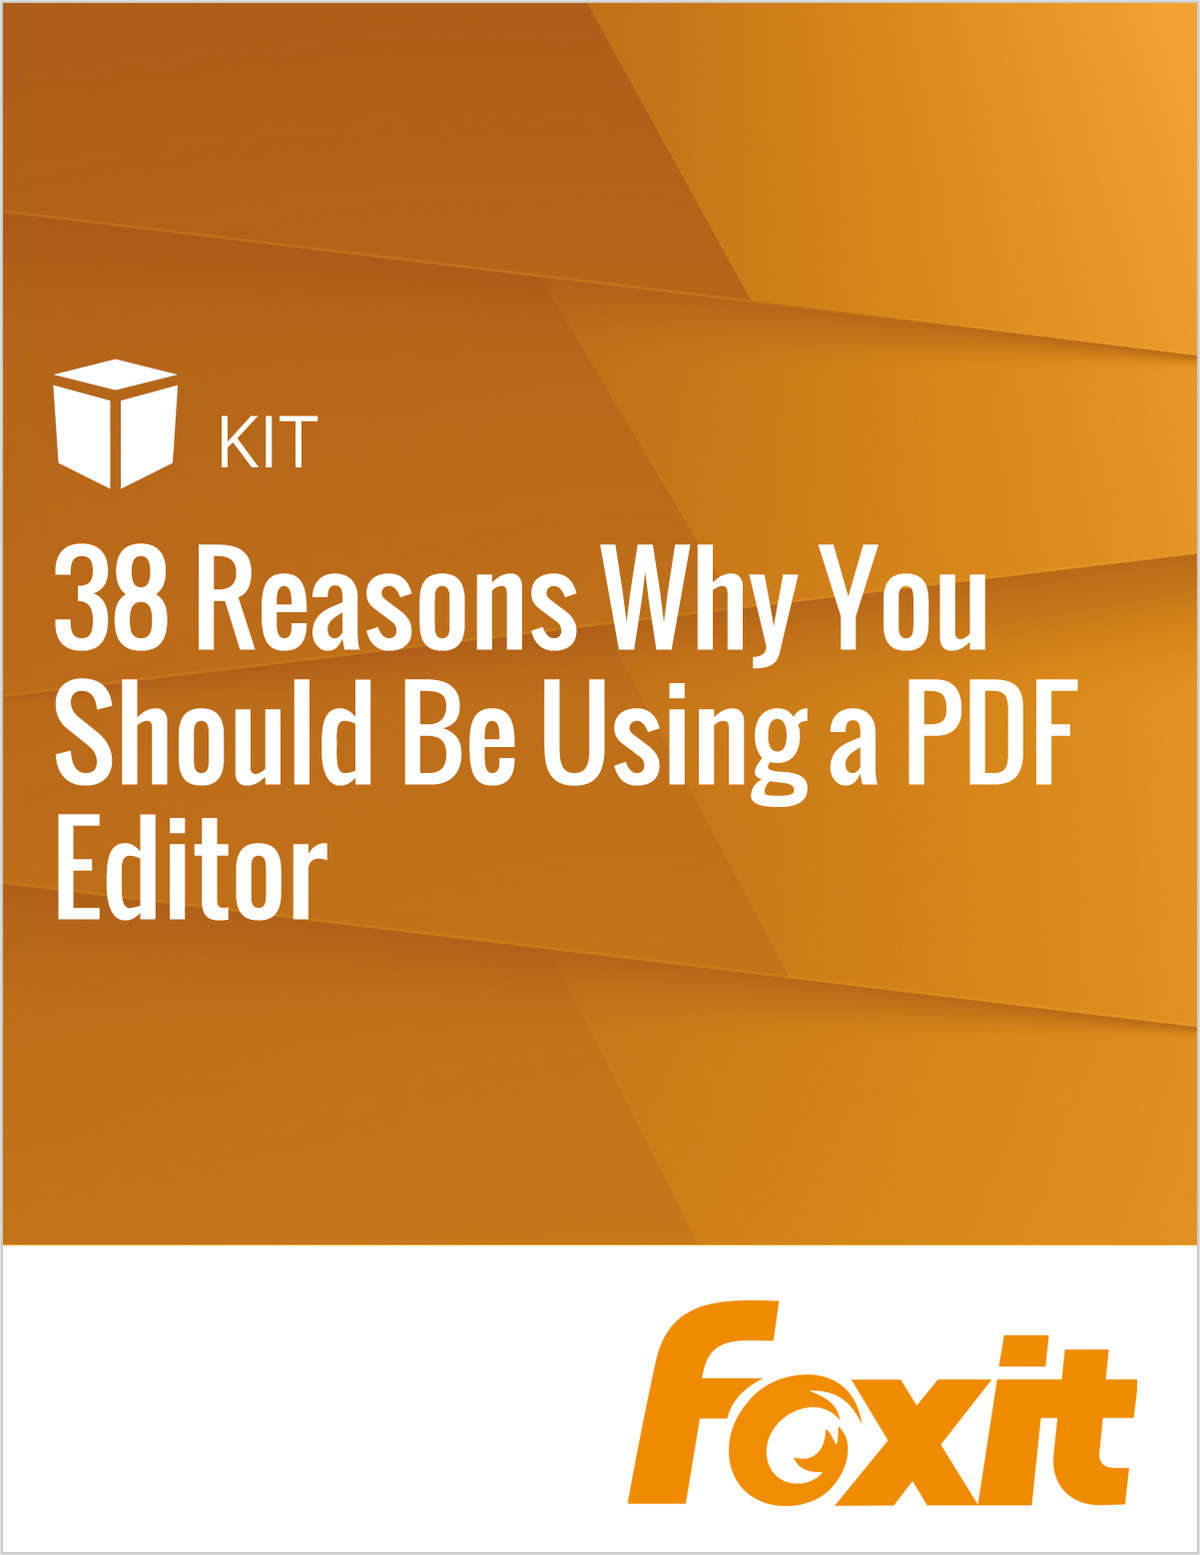 38 Reasons Why You Should Be Using a PDF Editor